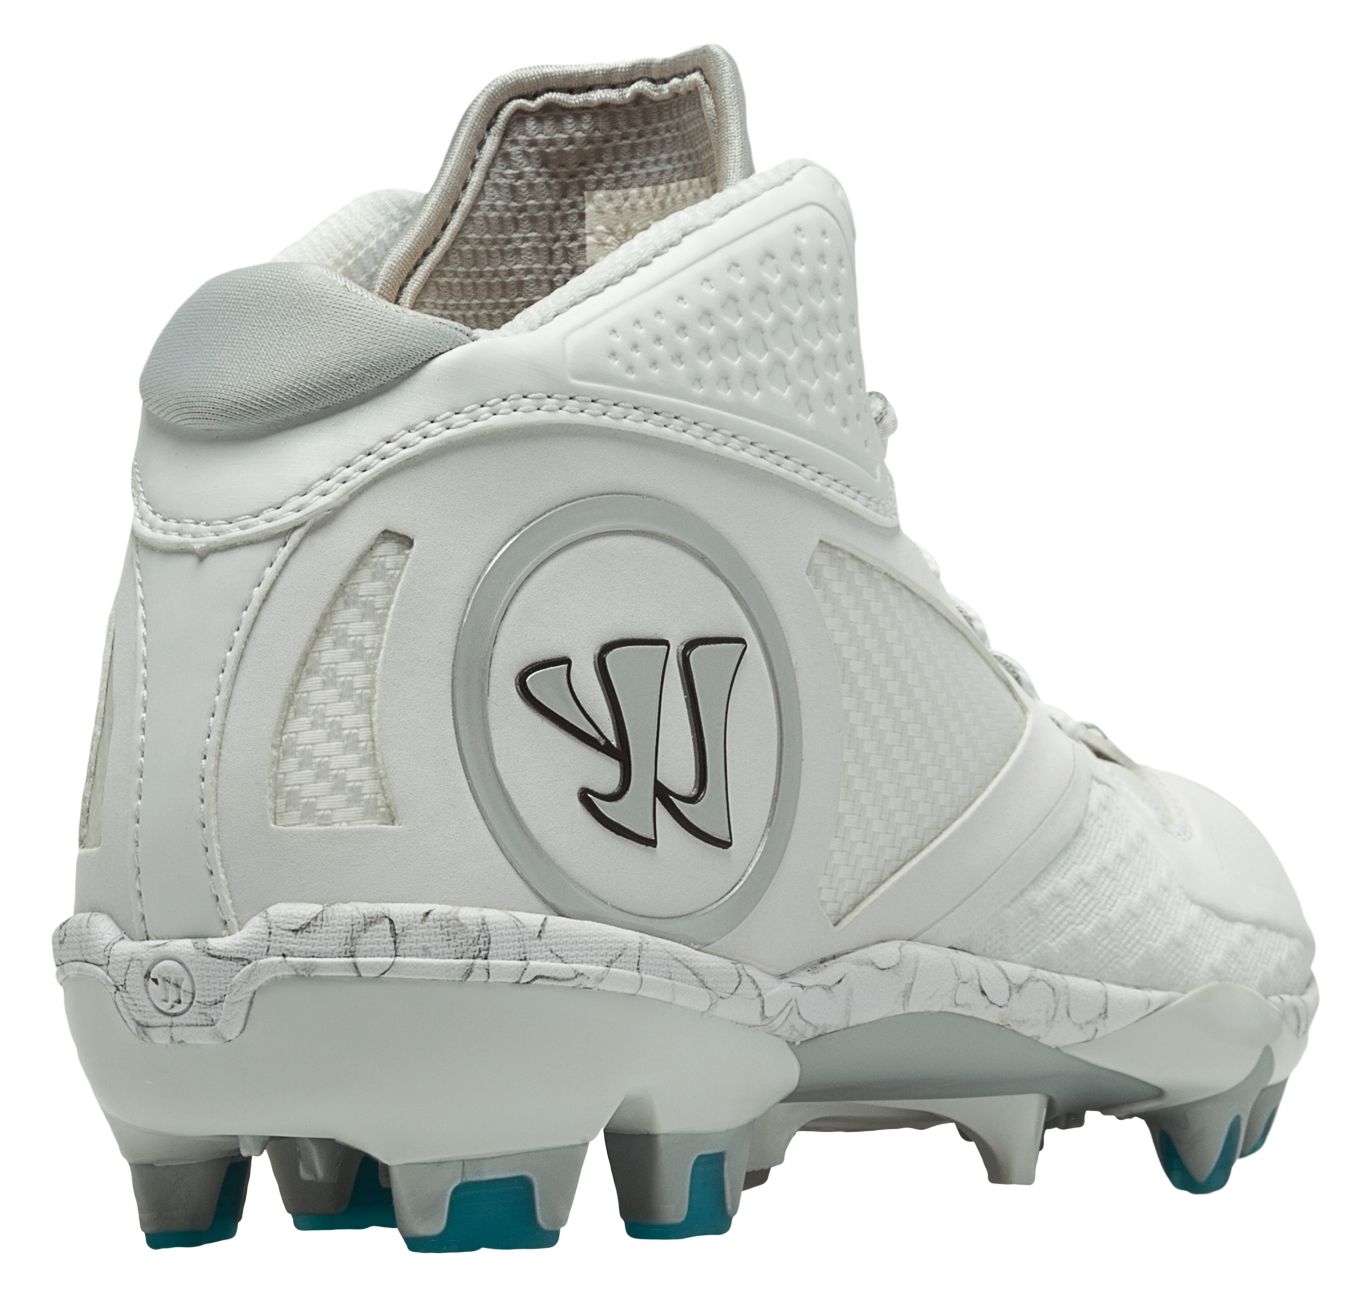 Adonis 2.0 Cleat, White with Silver image number 2